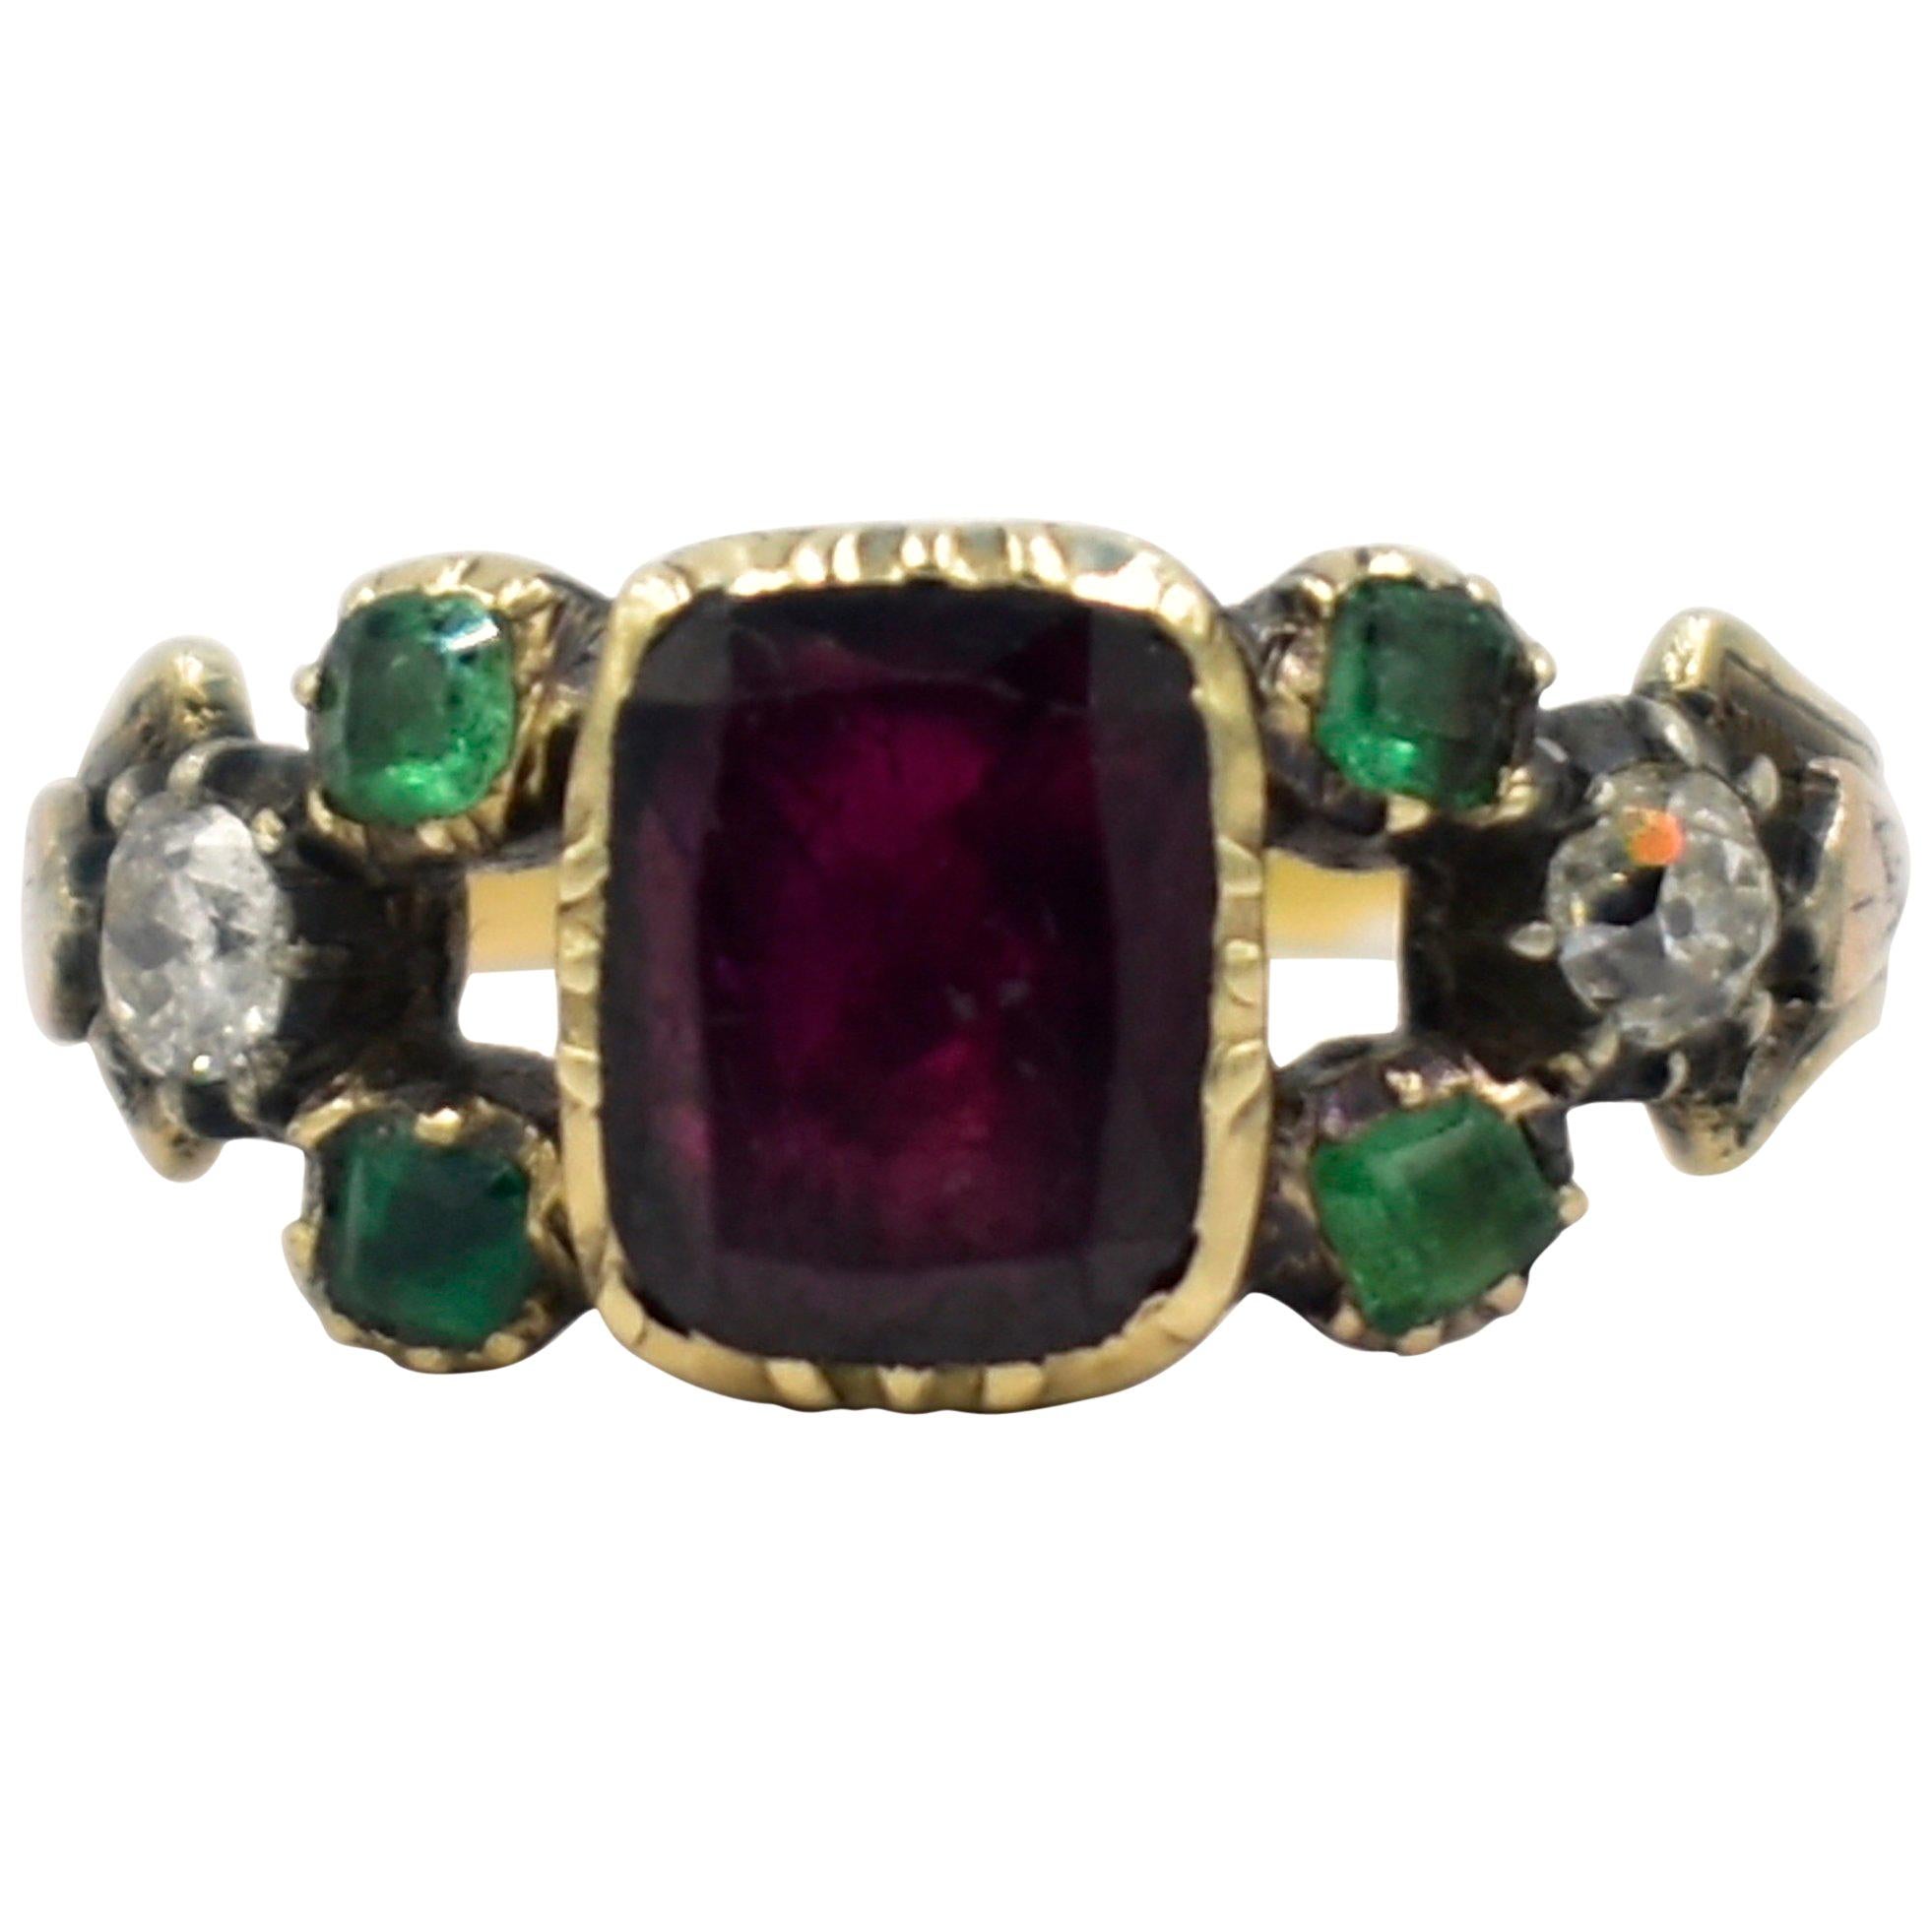 Antique Garnet, Emerald and Ruby Ring